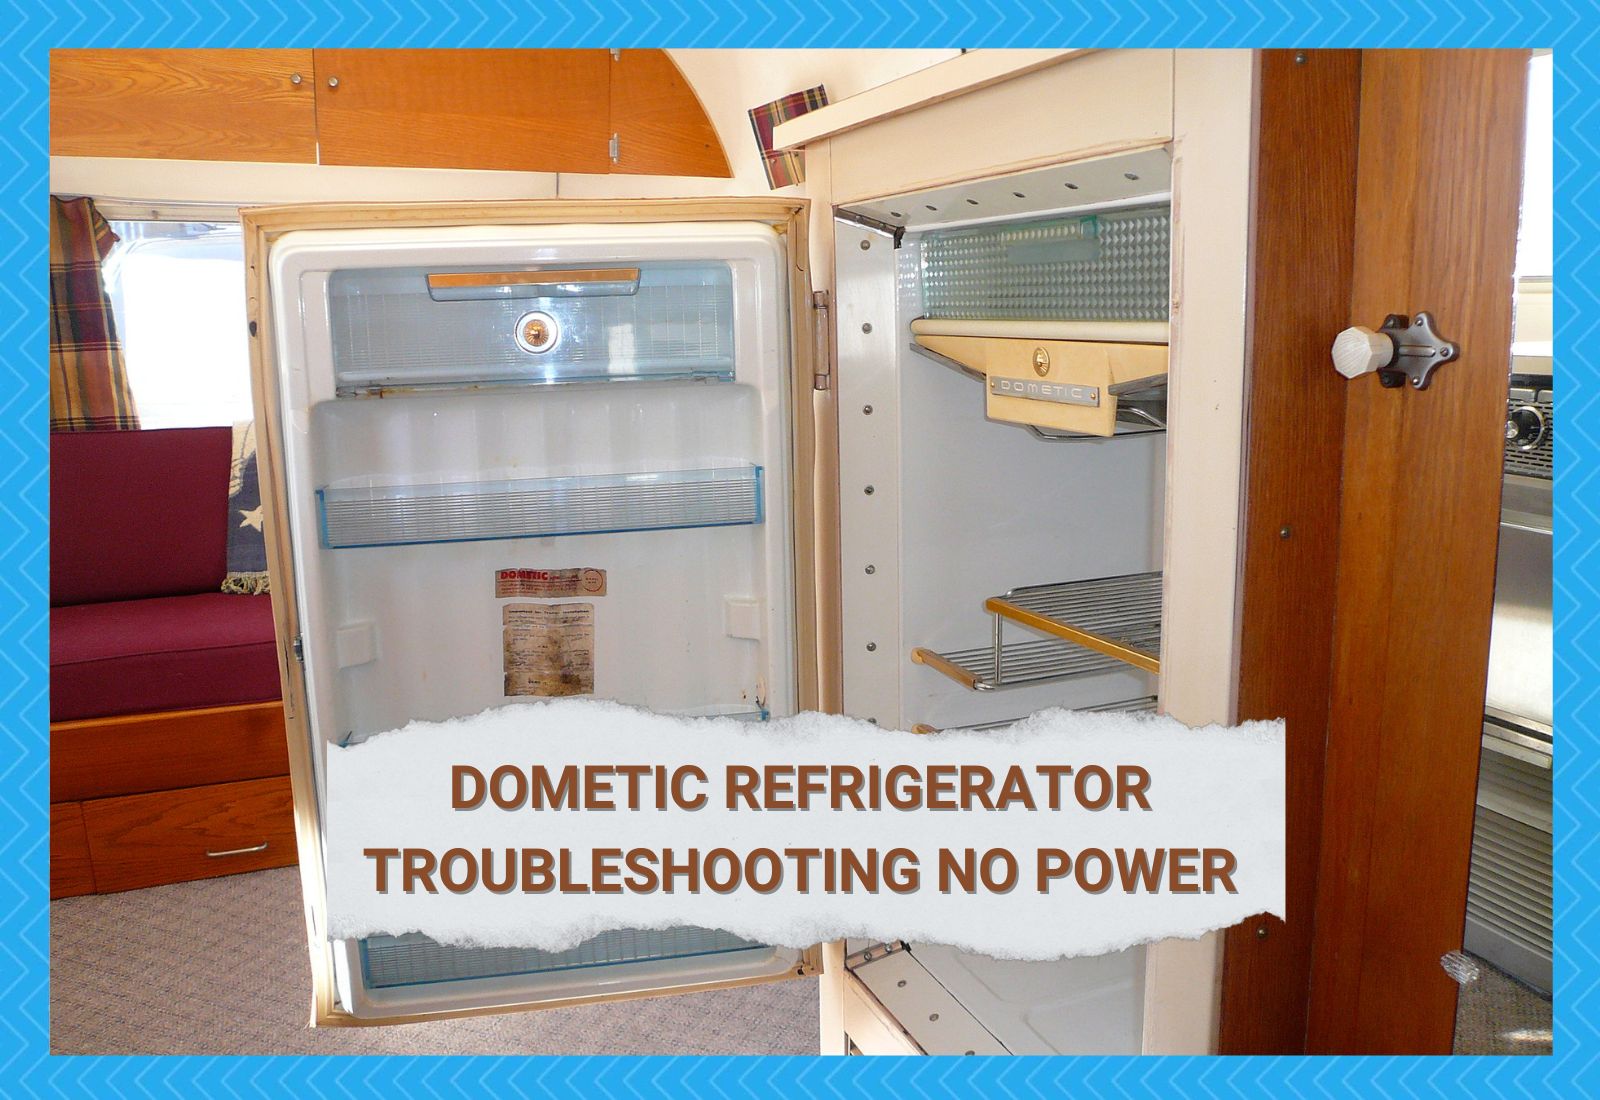 Dometic Refrigerator Troubleshooting No Power